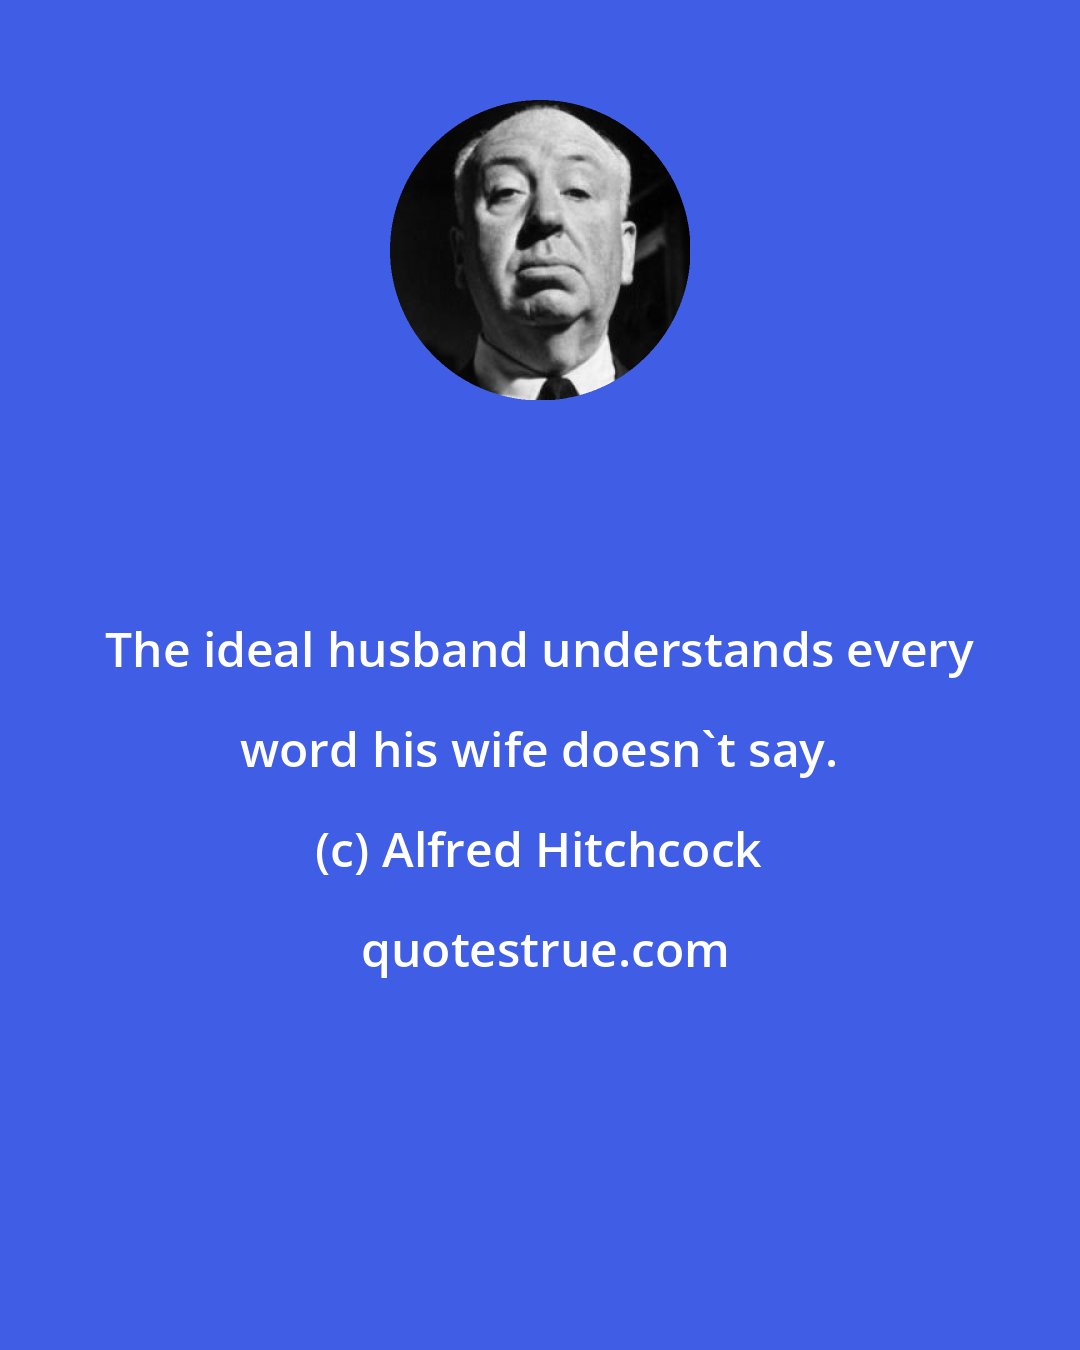 Alfred Hitchcock: The ideal husband understands every word his wife doesn't say.